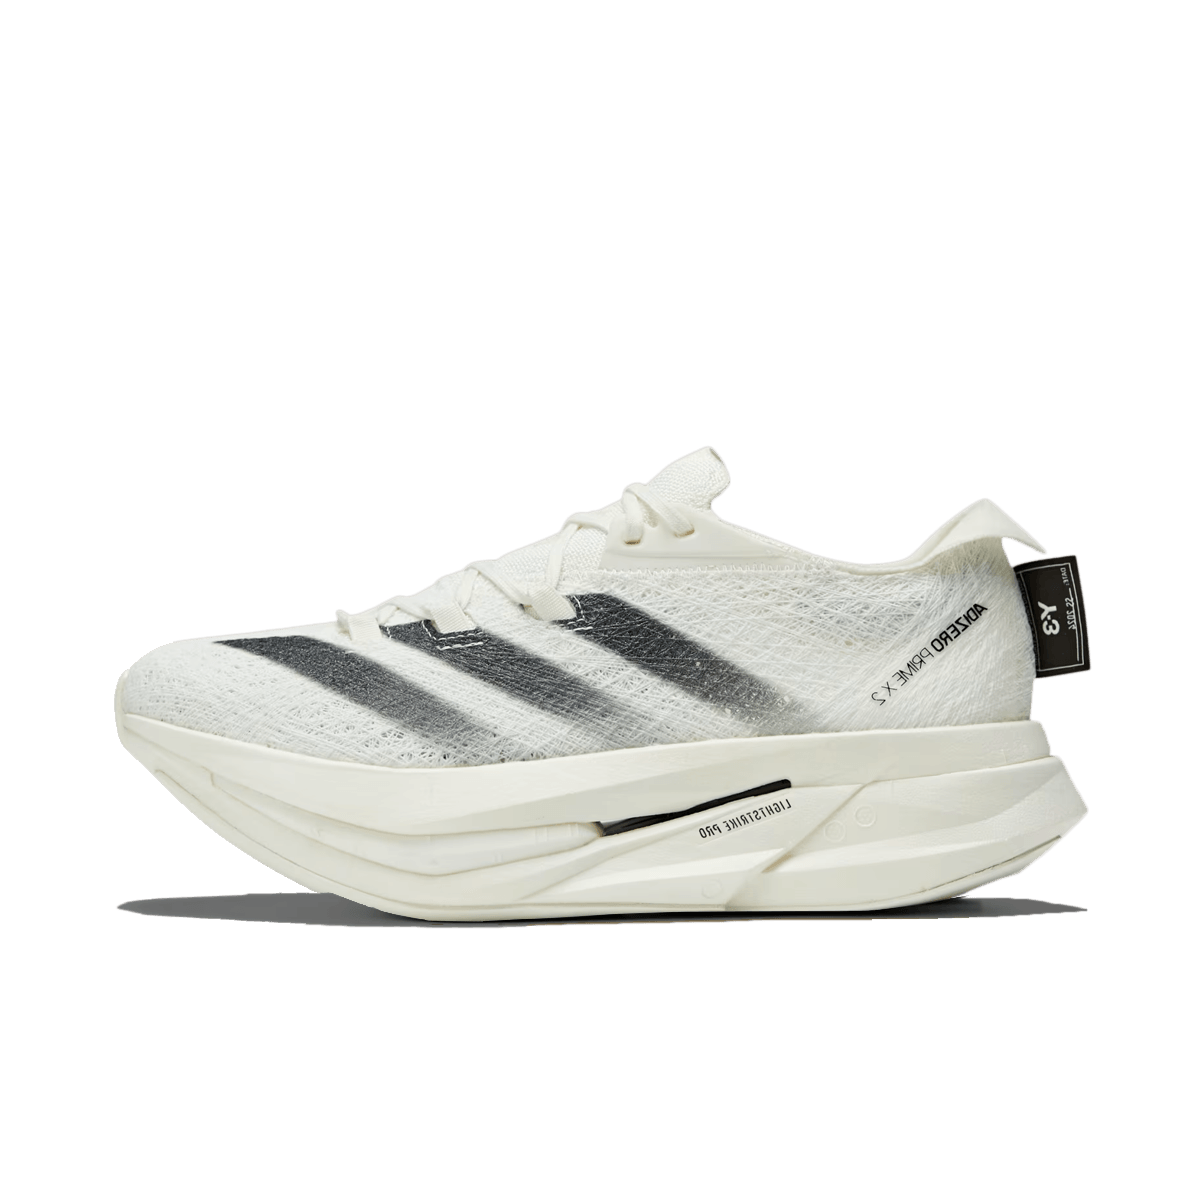 adidas Y-3 Prime X 2 Strung 'Off White' IF4286